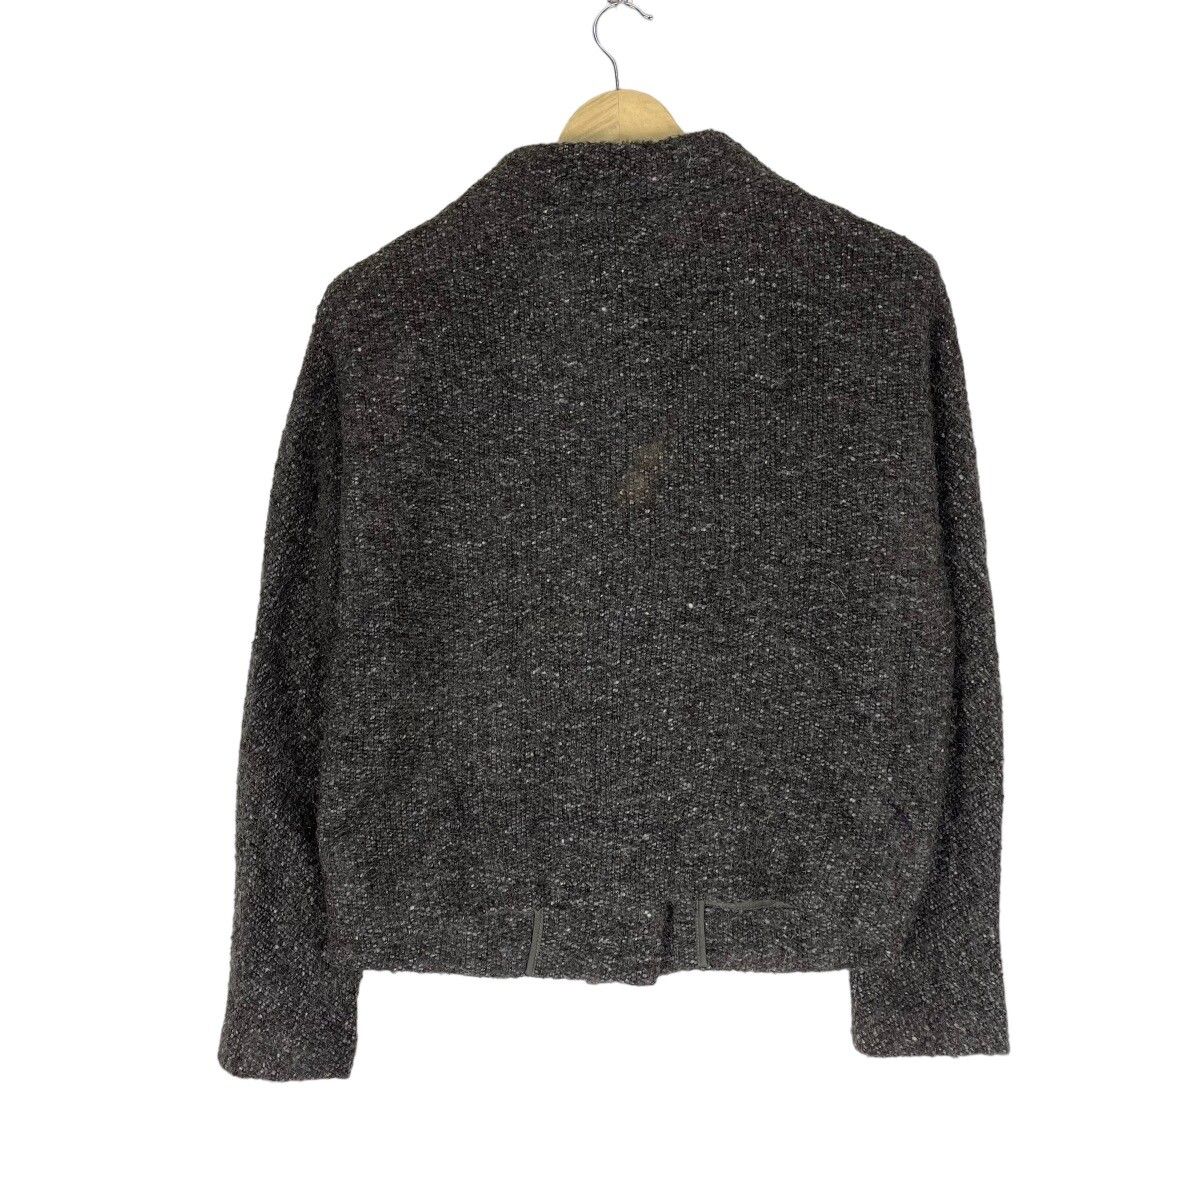 🌟ISABEL MARANT MOHAIR CROPPED BUTTON JACKET - 5